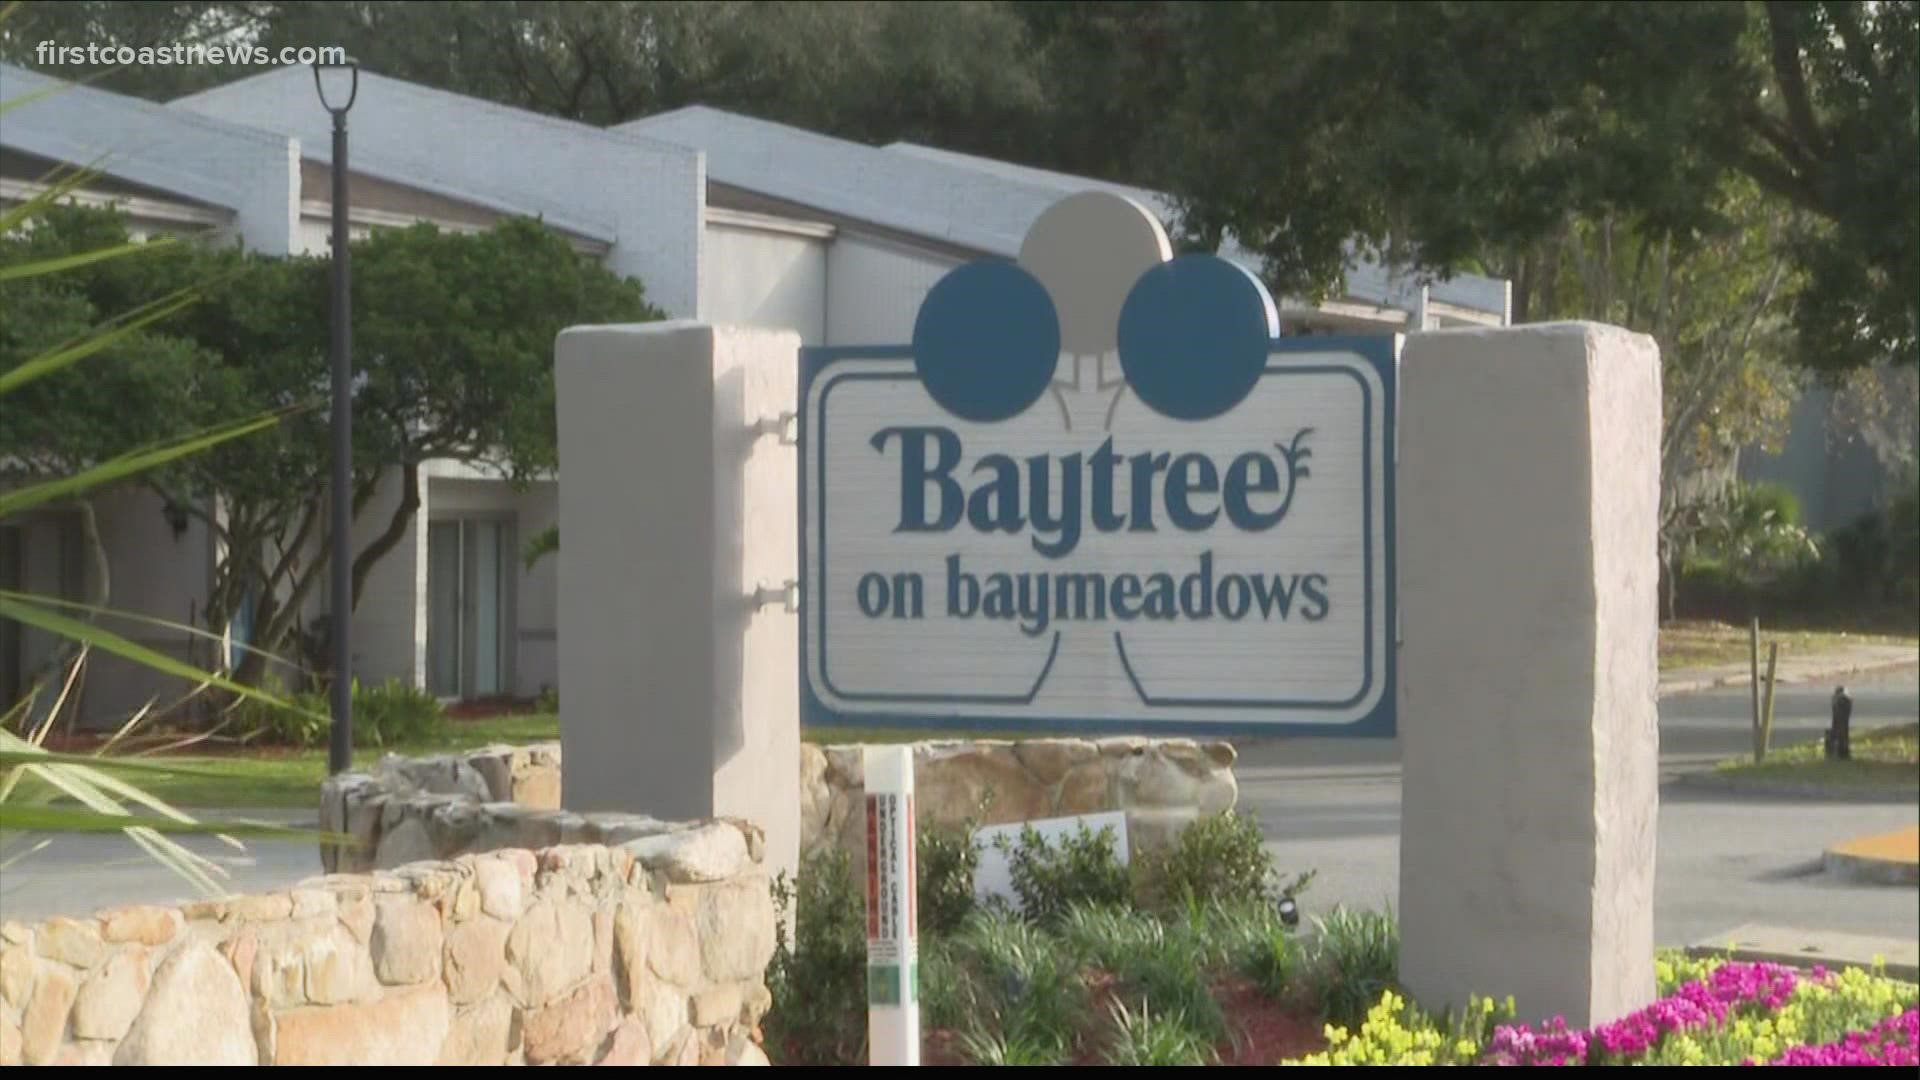 Officers were called to Baytree On Baymeadows Apartments around 4 a.m. A witness said they saw a person struggling in a retention pond, then go under water.